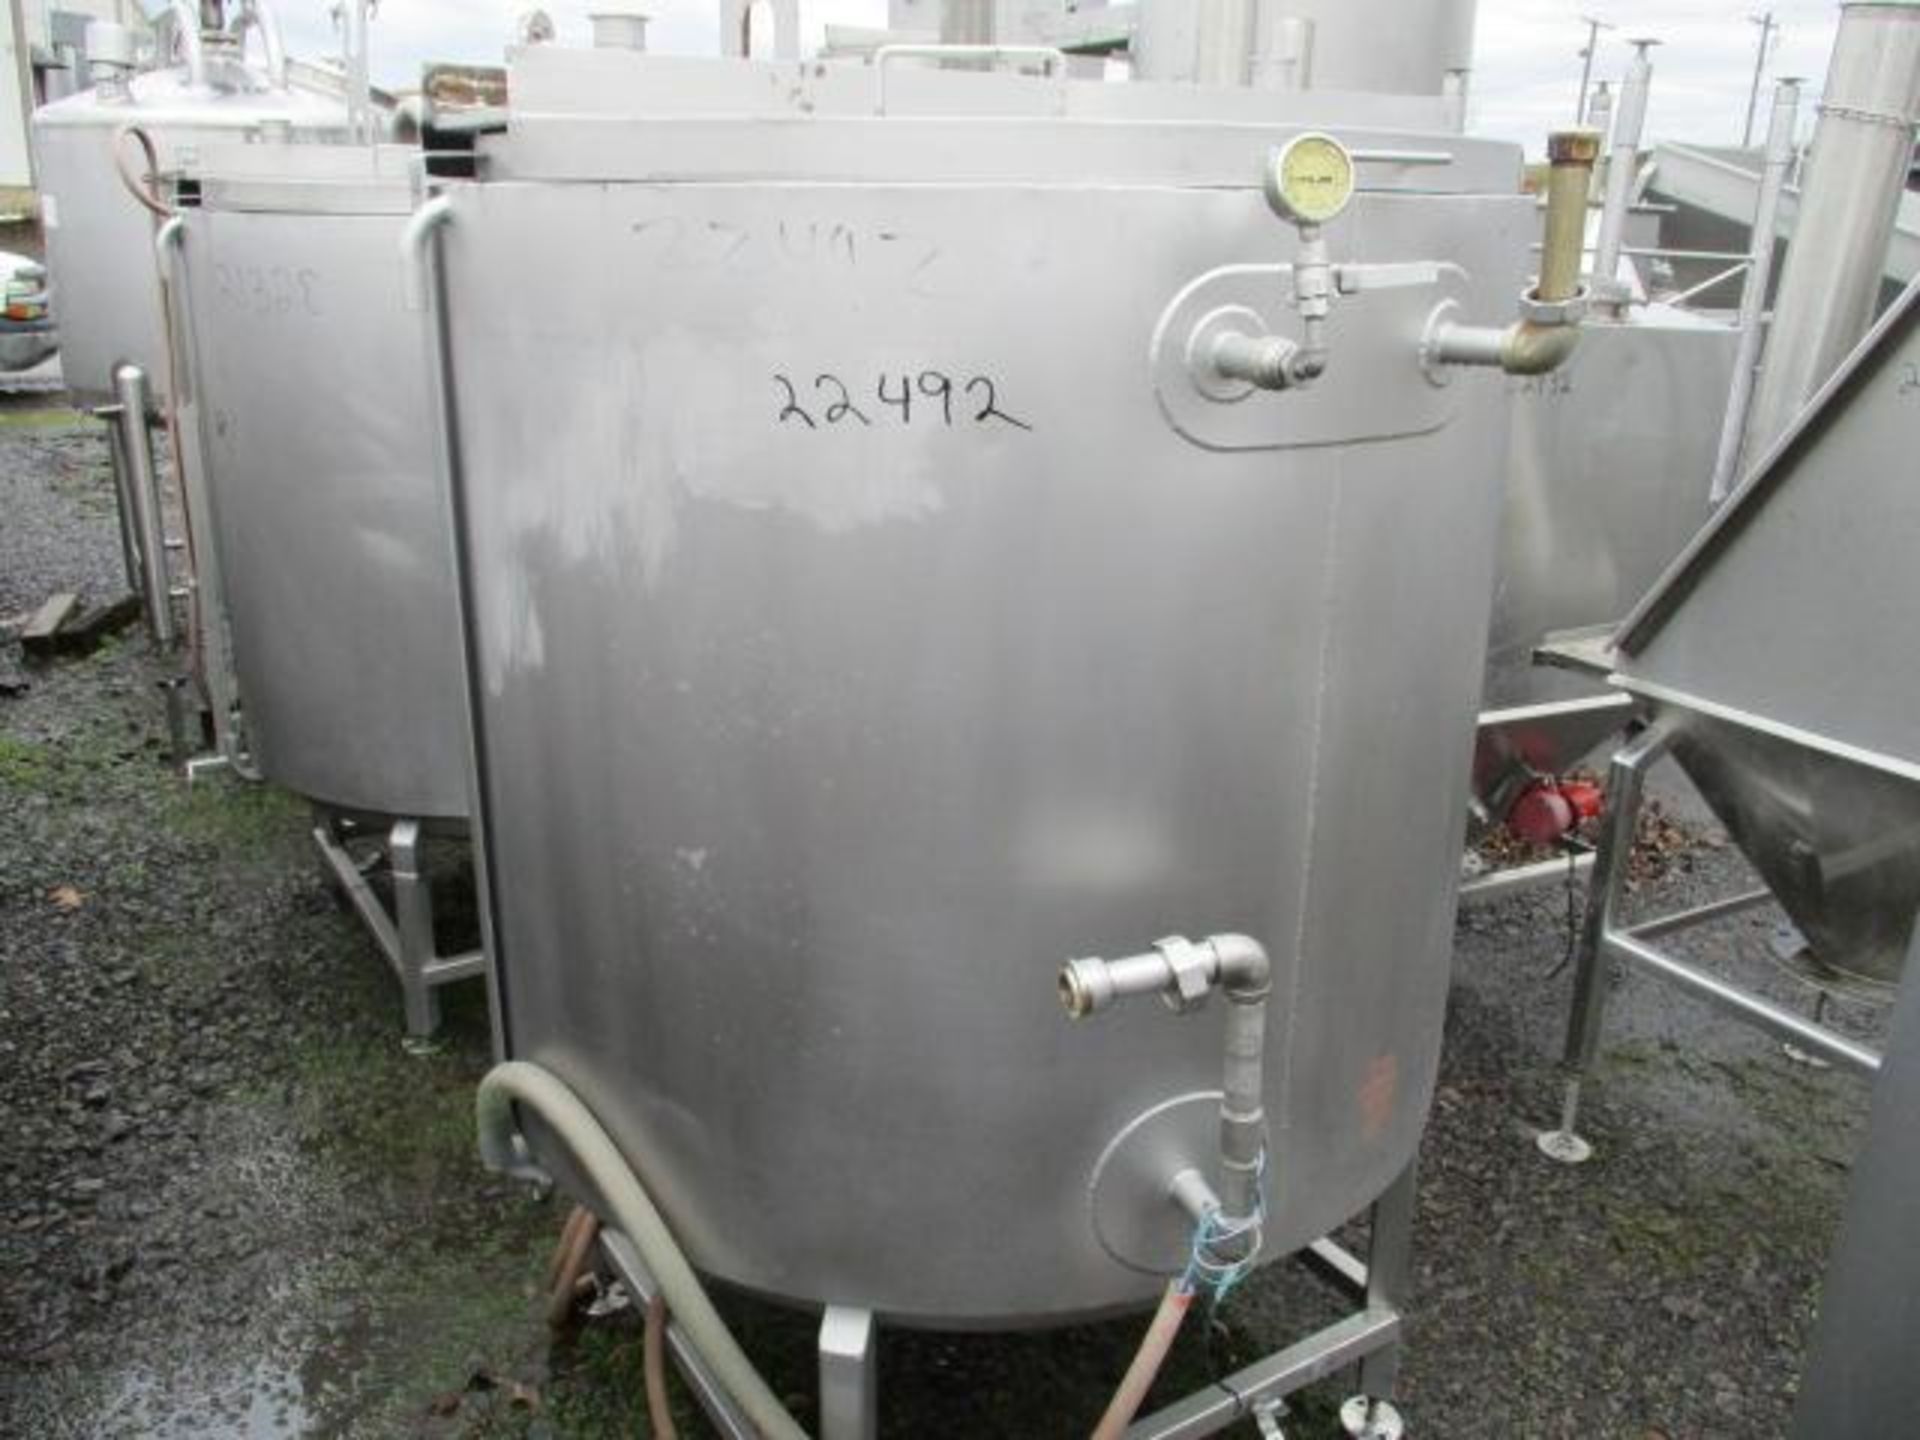 300 GALLON JACKETED STAINLESS STEEL TANK, MEASURES 4' DEEP AND 44" DIAMETER - Image 3 of 5